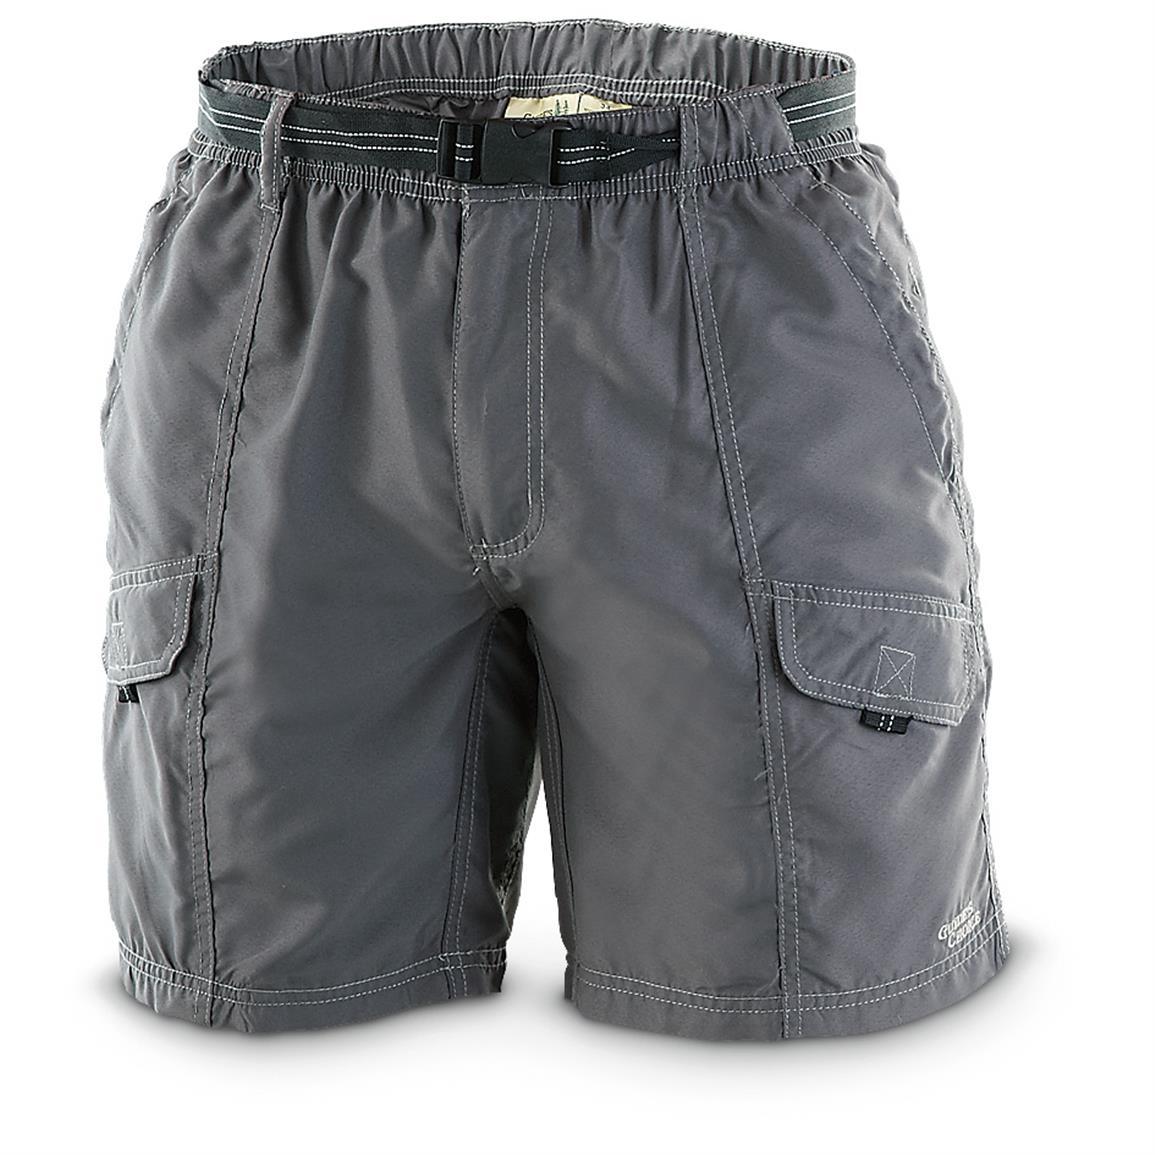 Guide S Choice Men S River Shorts 621023 Shorts At Sportsman S Guide